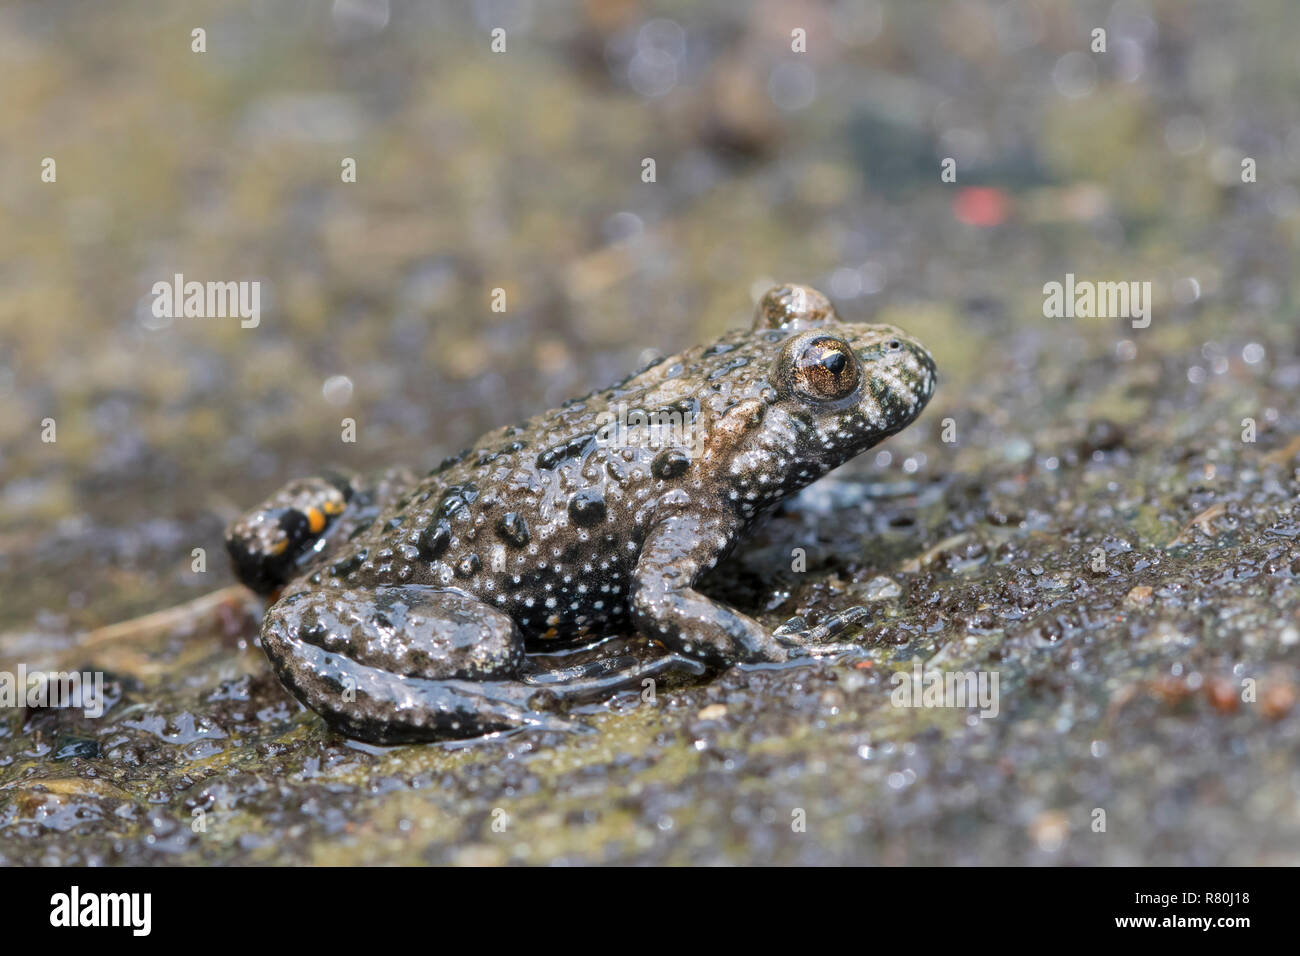 Fire-bellied toad (Bombina bombina). Adult on wet ground. Germany Stock Photo